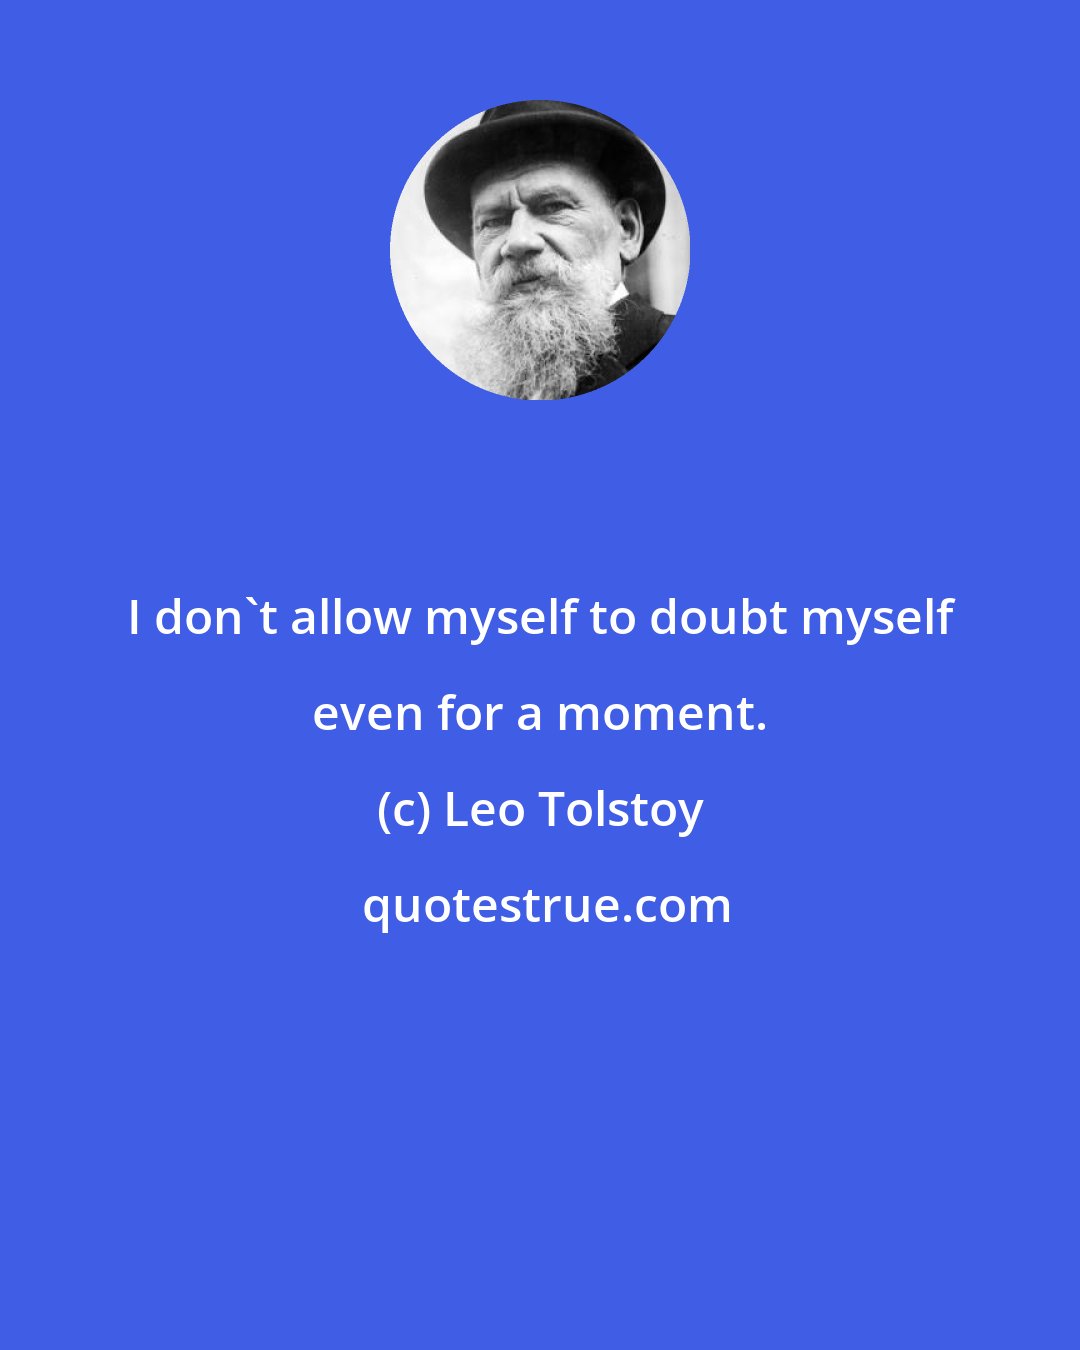 Leo Tolstoy: I don't allow myself to doubt myself even for a moment.